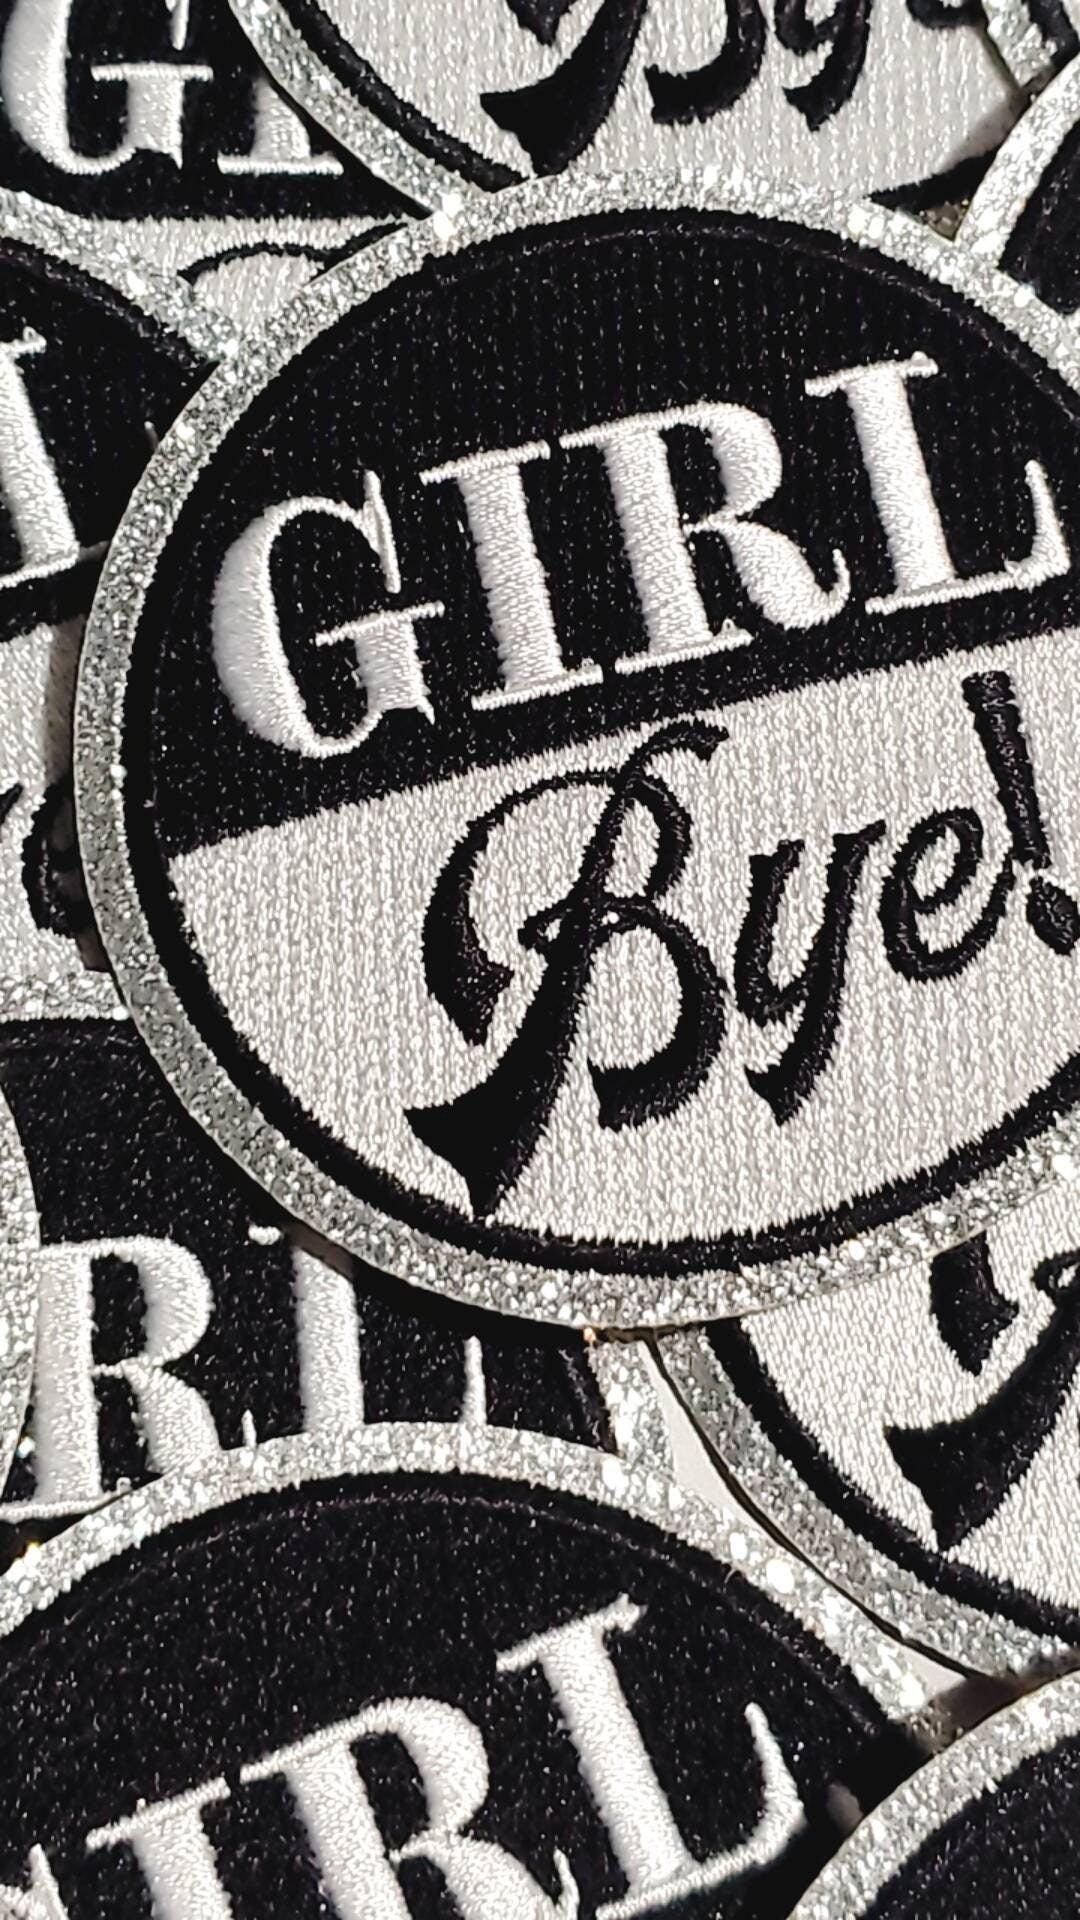 Exclusive, 1-pc "Girl, Bye." Black & White w/SILVER Glitter, Size 3" Embroidered Patch; Cool Patch for Clothing, Bags, Shoes, Bling Patch